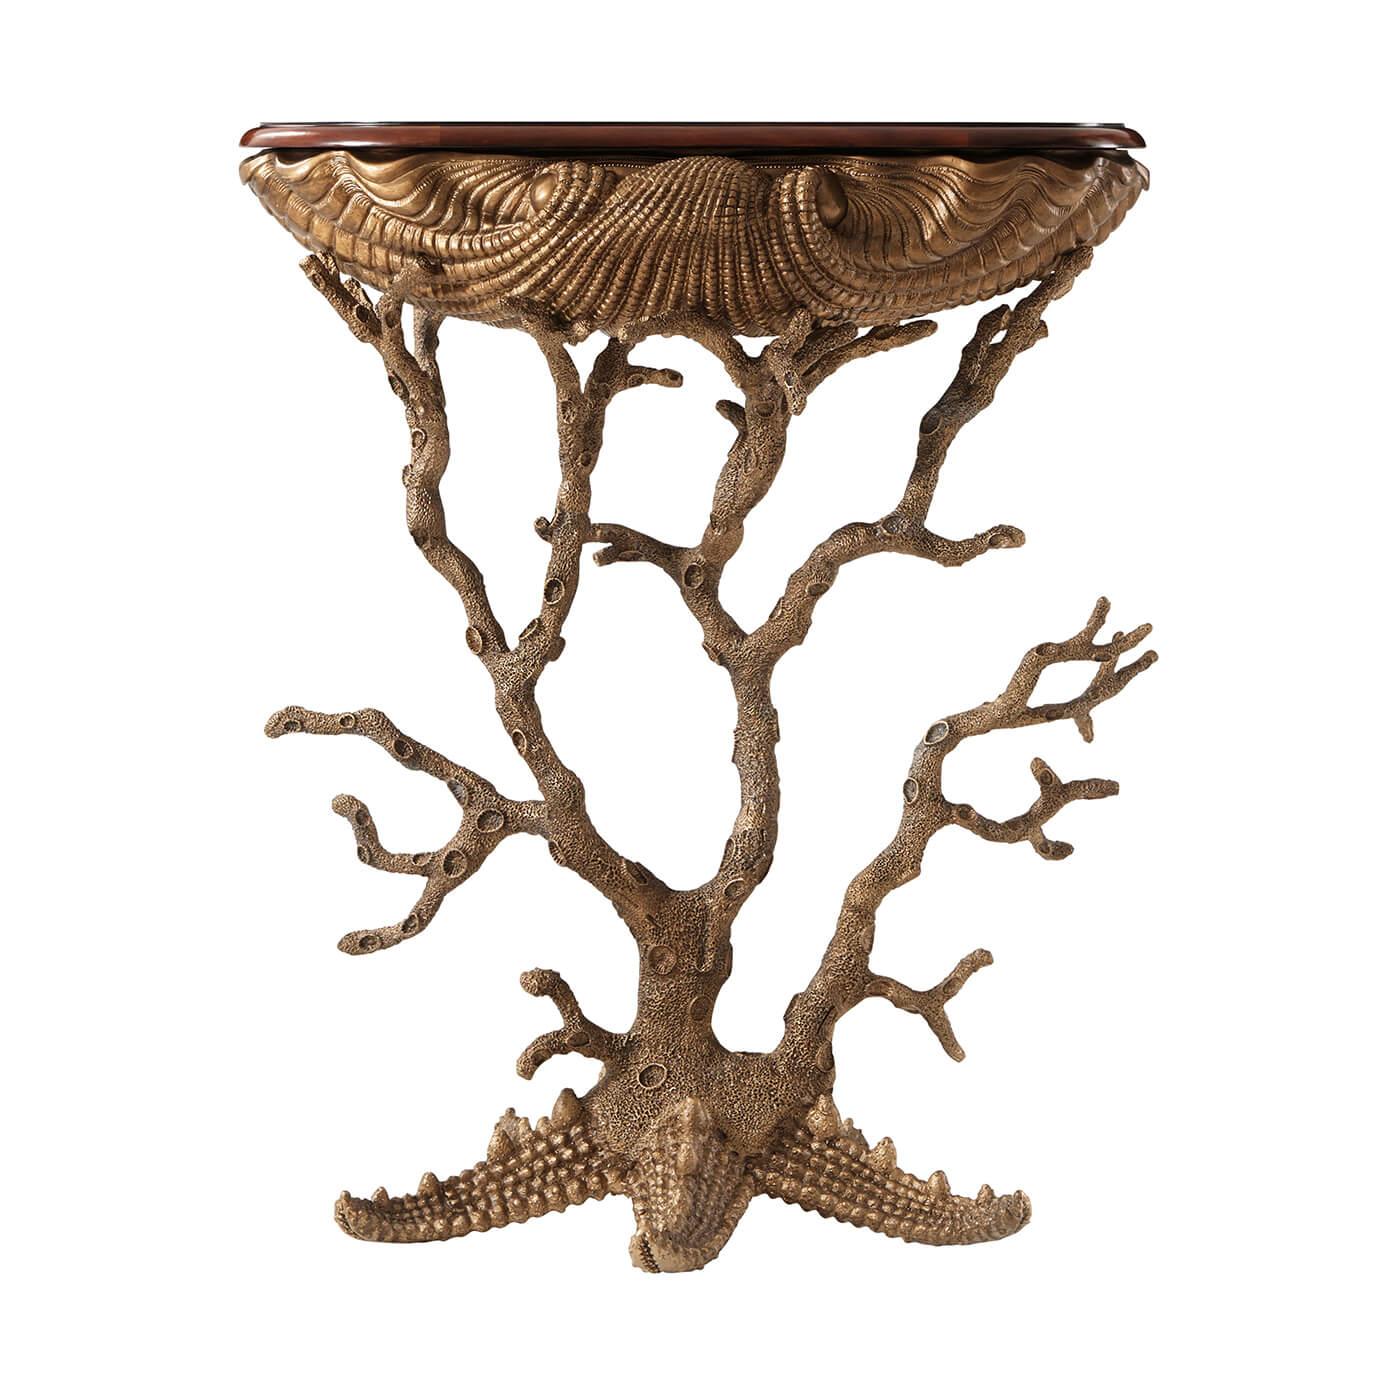 An unusual Grotto table, the rounded 'D' shaped flame mahogany and rosewood crossbanded top above a gilt metal cast base of a giant clamshell supported by coral legs issuing from a starfish. Inspired by Renaissance shell-decorated